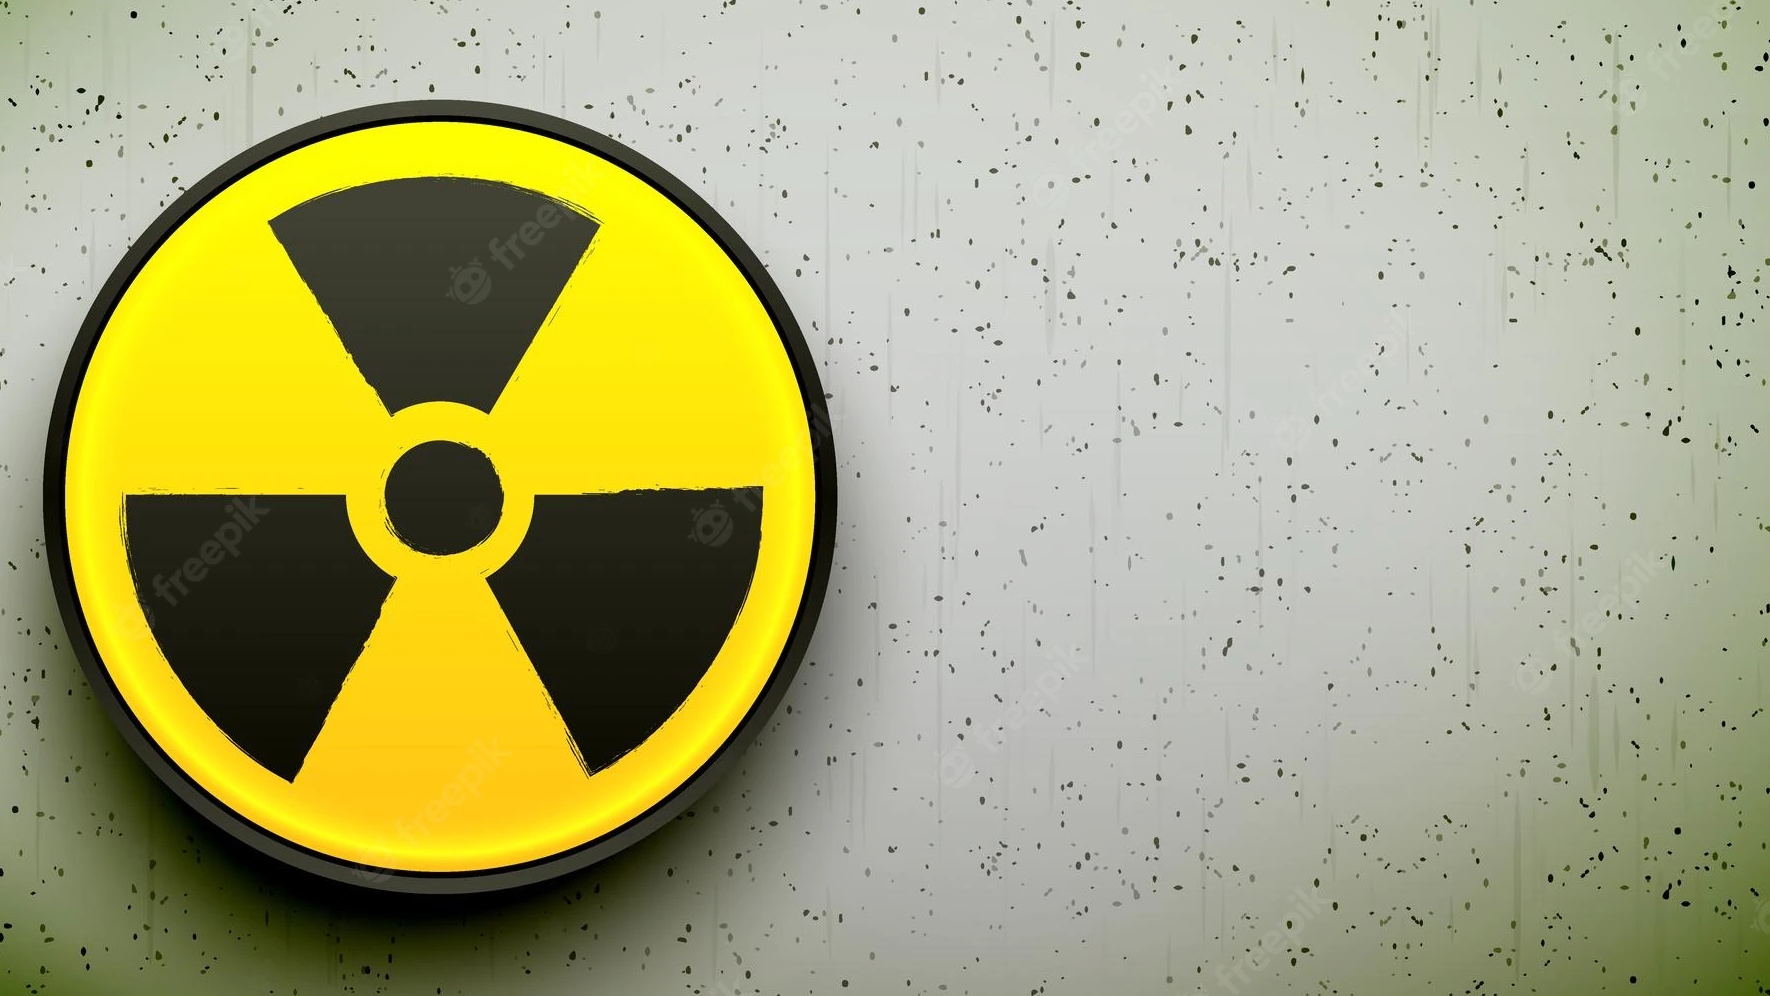 The IAEA calls for the immediate creation of a safe zone around the nuclear power plant